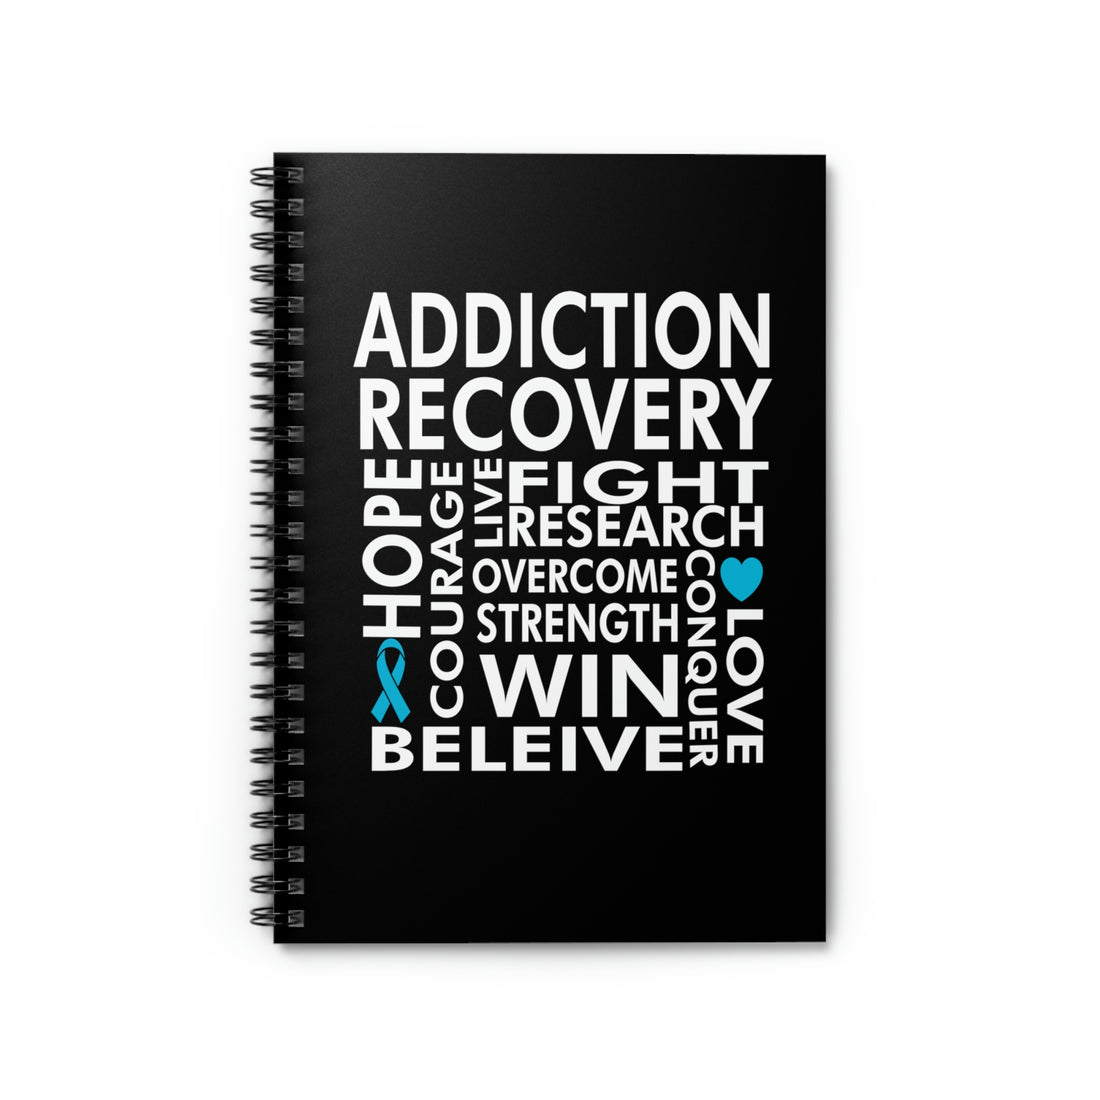 Addiction Recovery - Spiral Notebook - Ruled Line